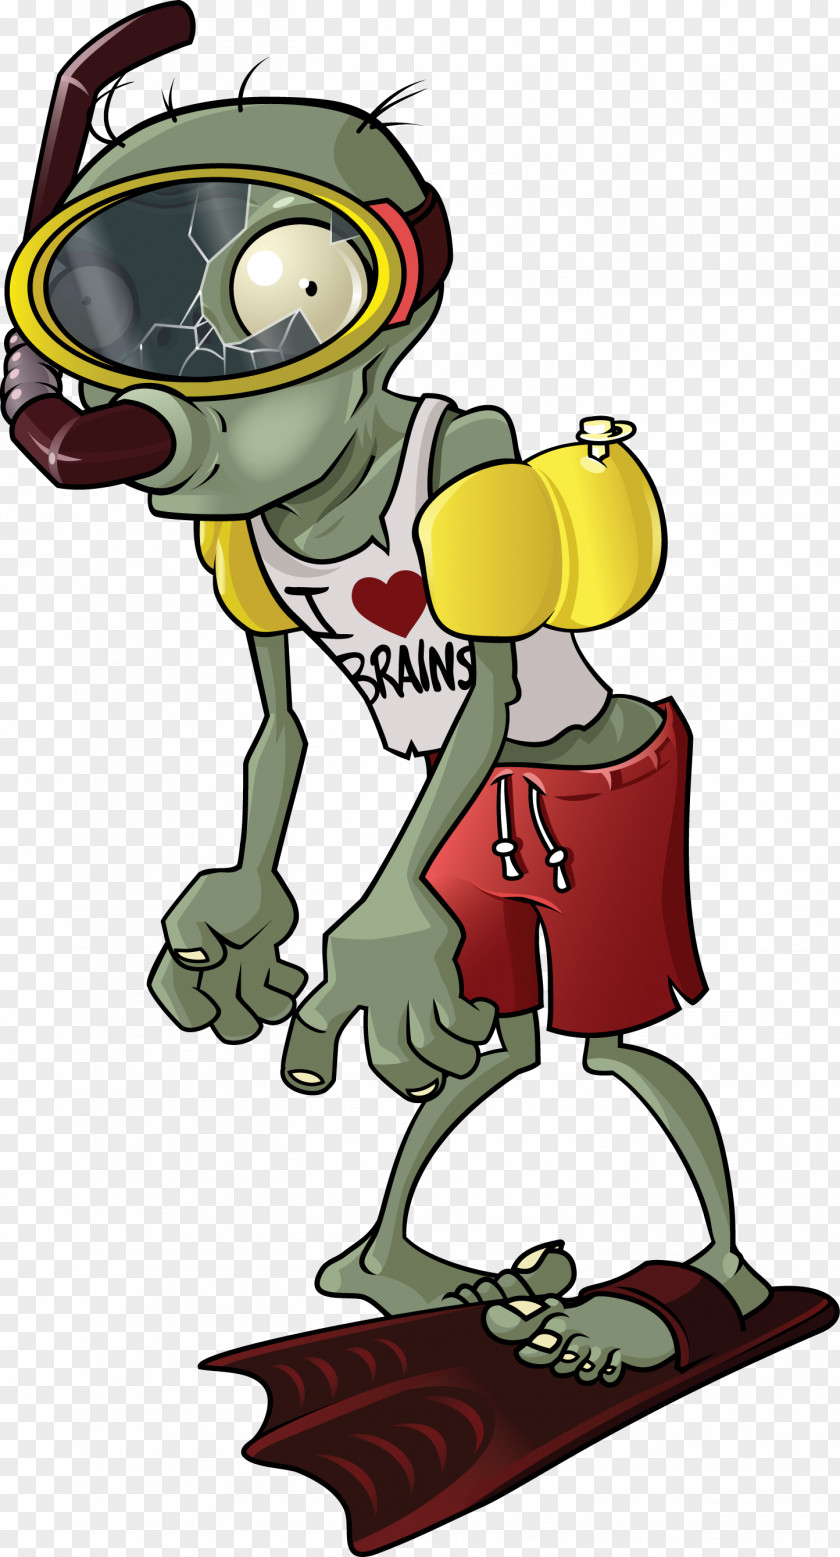 Plants Vs. Zombies 2: It's About Time Vs Adventures The Art Of PNG vs. vs of Zombies, zombie, Plant VS Zombie character illustration clipart PNG